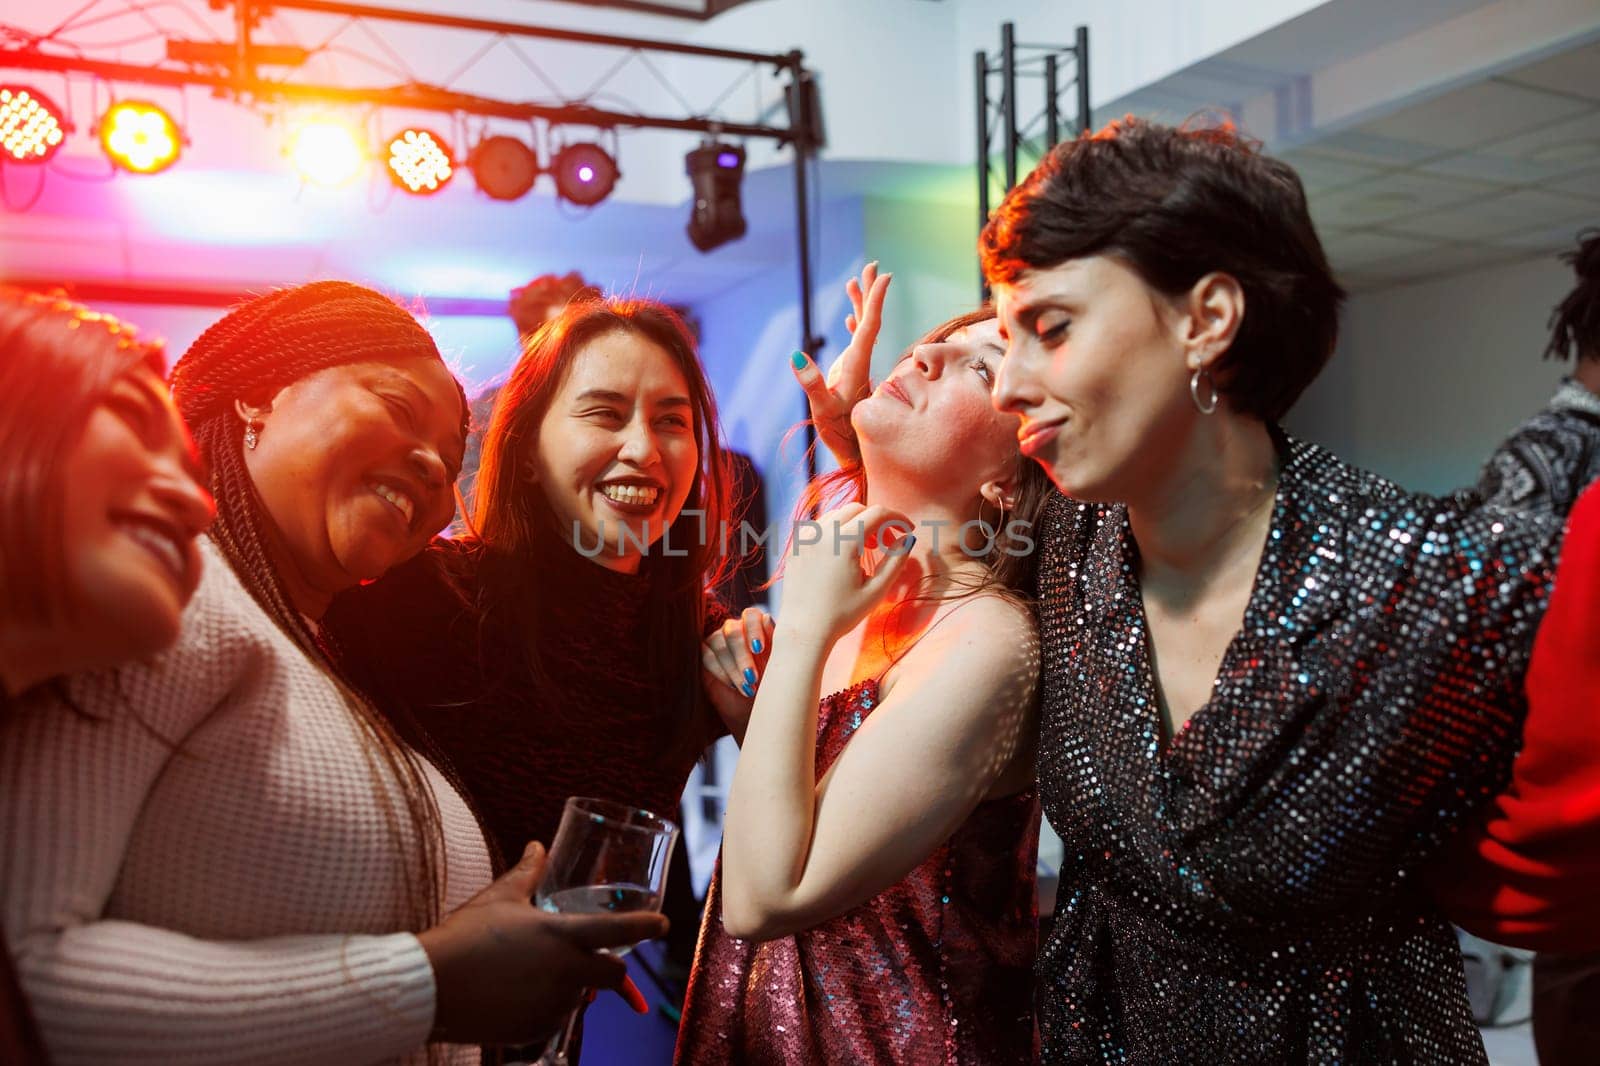 Cheerful smiling women drinking alcohol, hugging and partying together in nightclub. Carefree diverse girlfriends holding beverage glasses, laughing and having fun in club